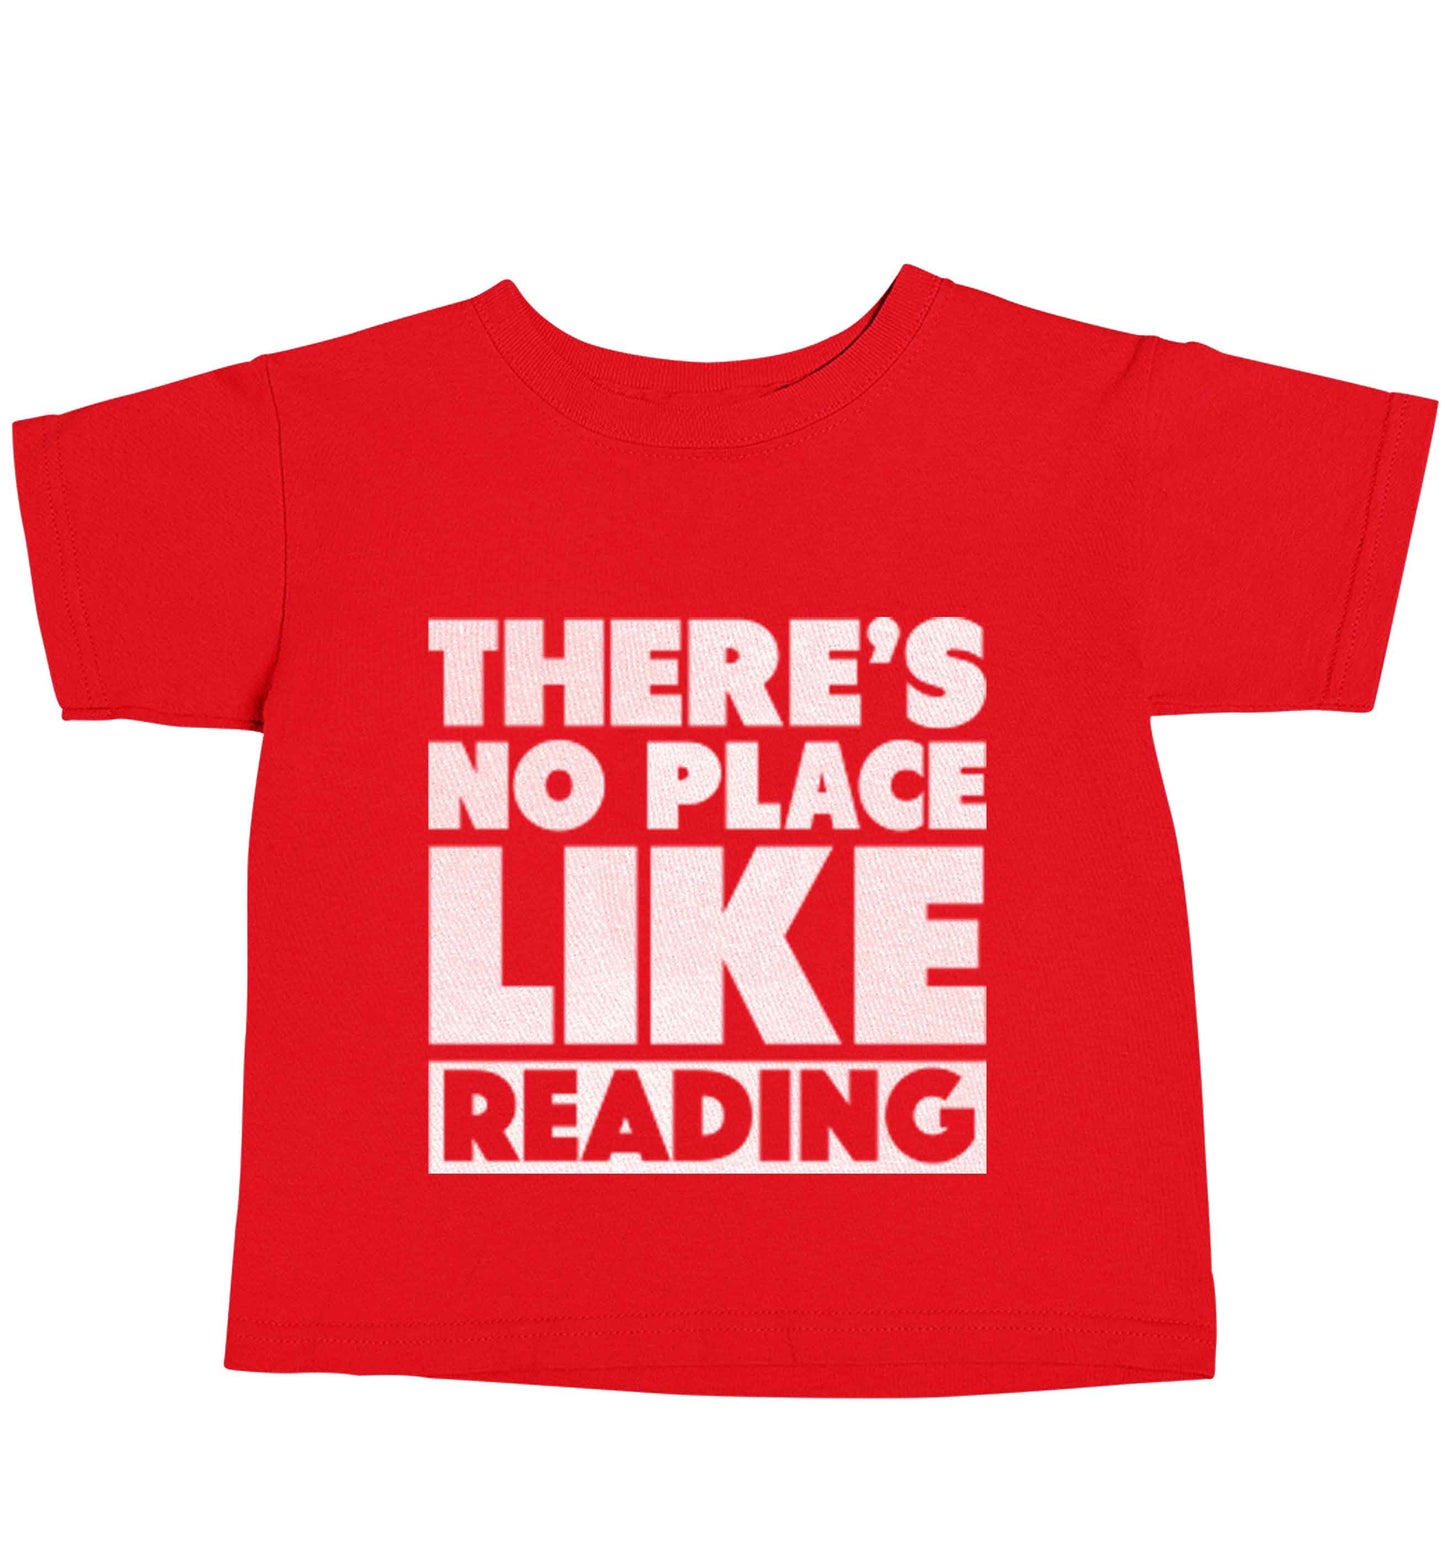 There's no place like Readingred baby toddler Tshirt 2 Years